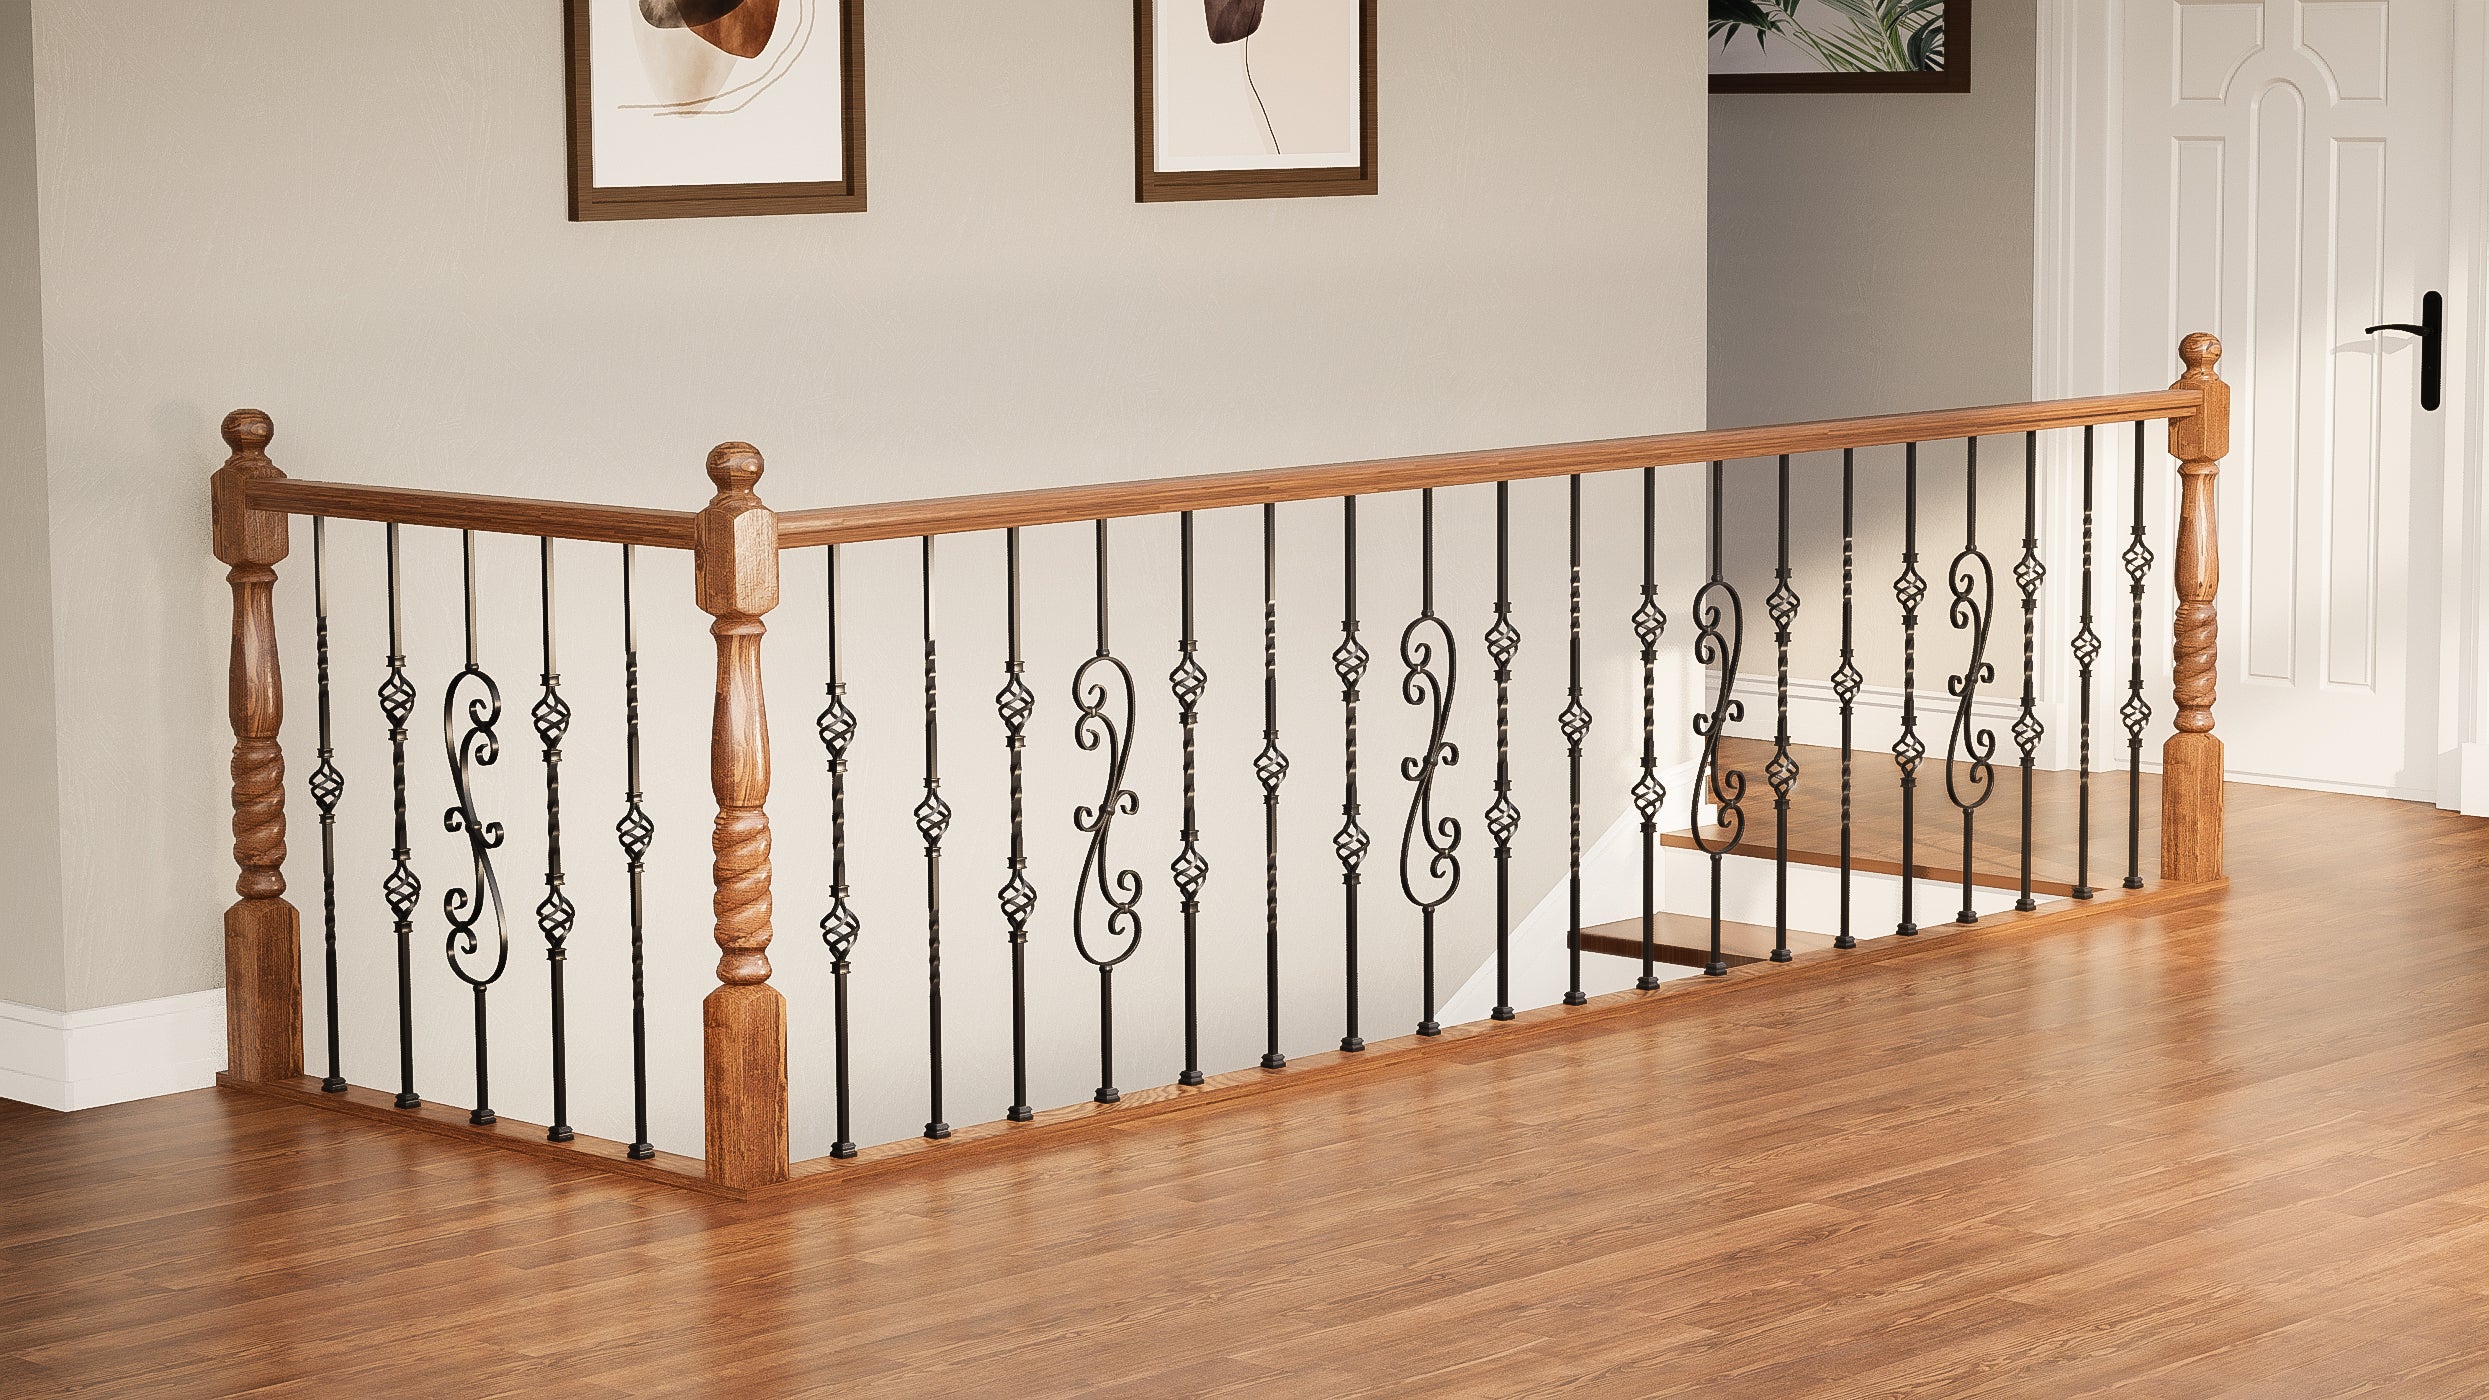 The Muzata's newly launched Wrought Iron Baluster has an excellent effect when used indoors.